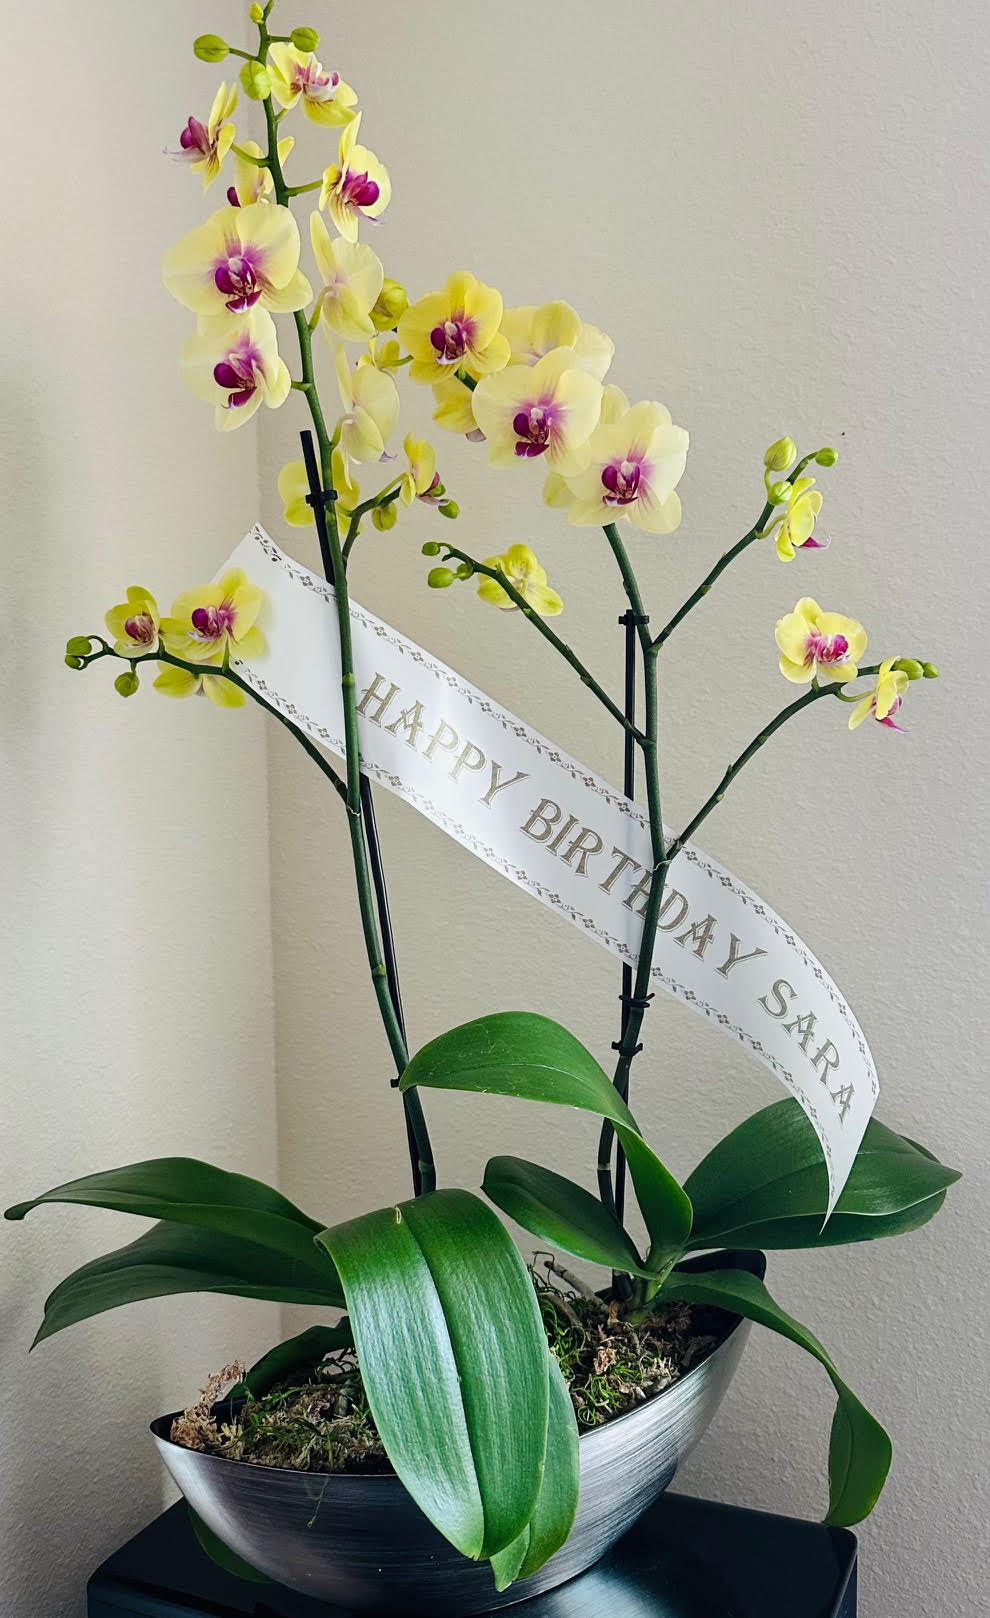 A Designer's Choice Orchid - Orchids by Donya's Florals